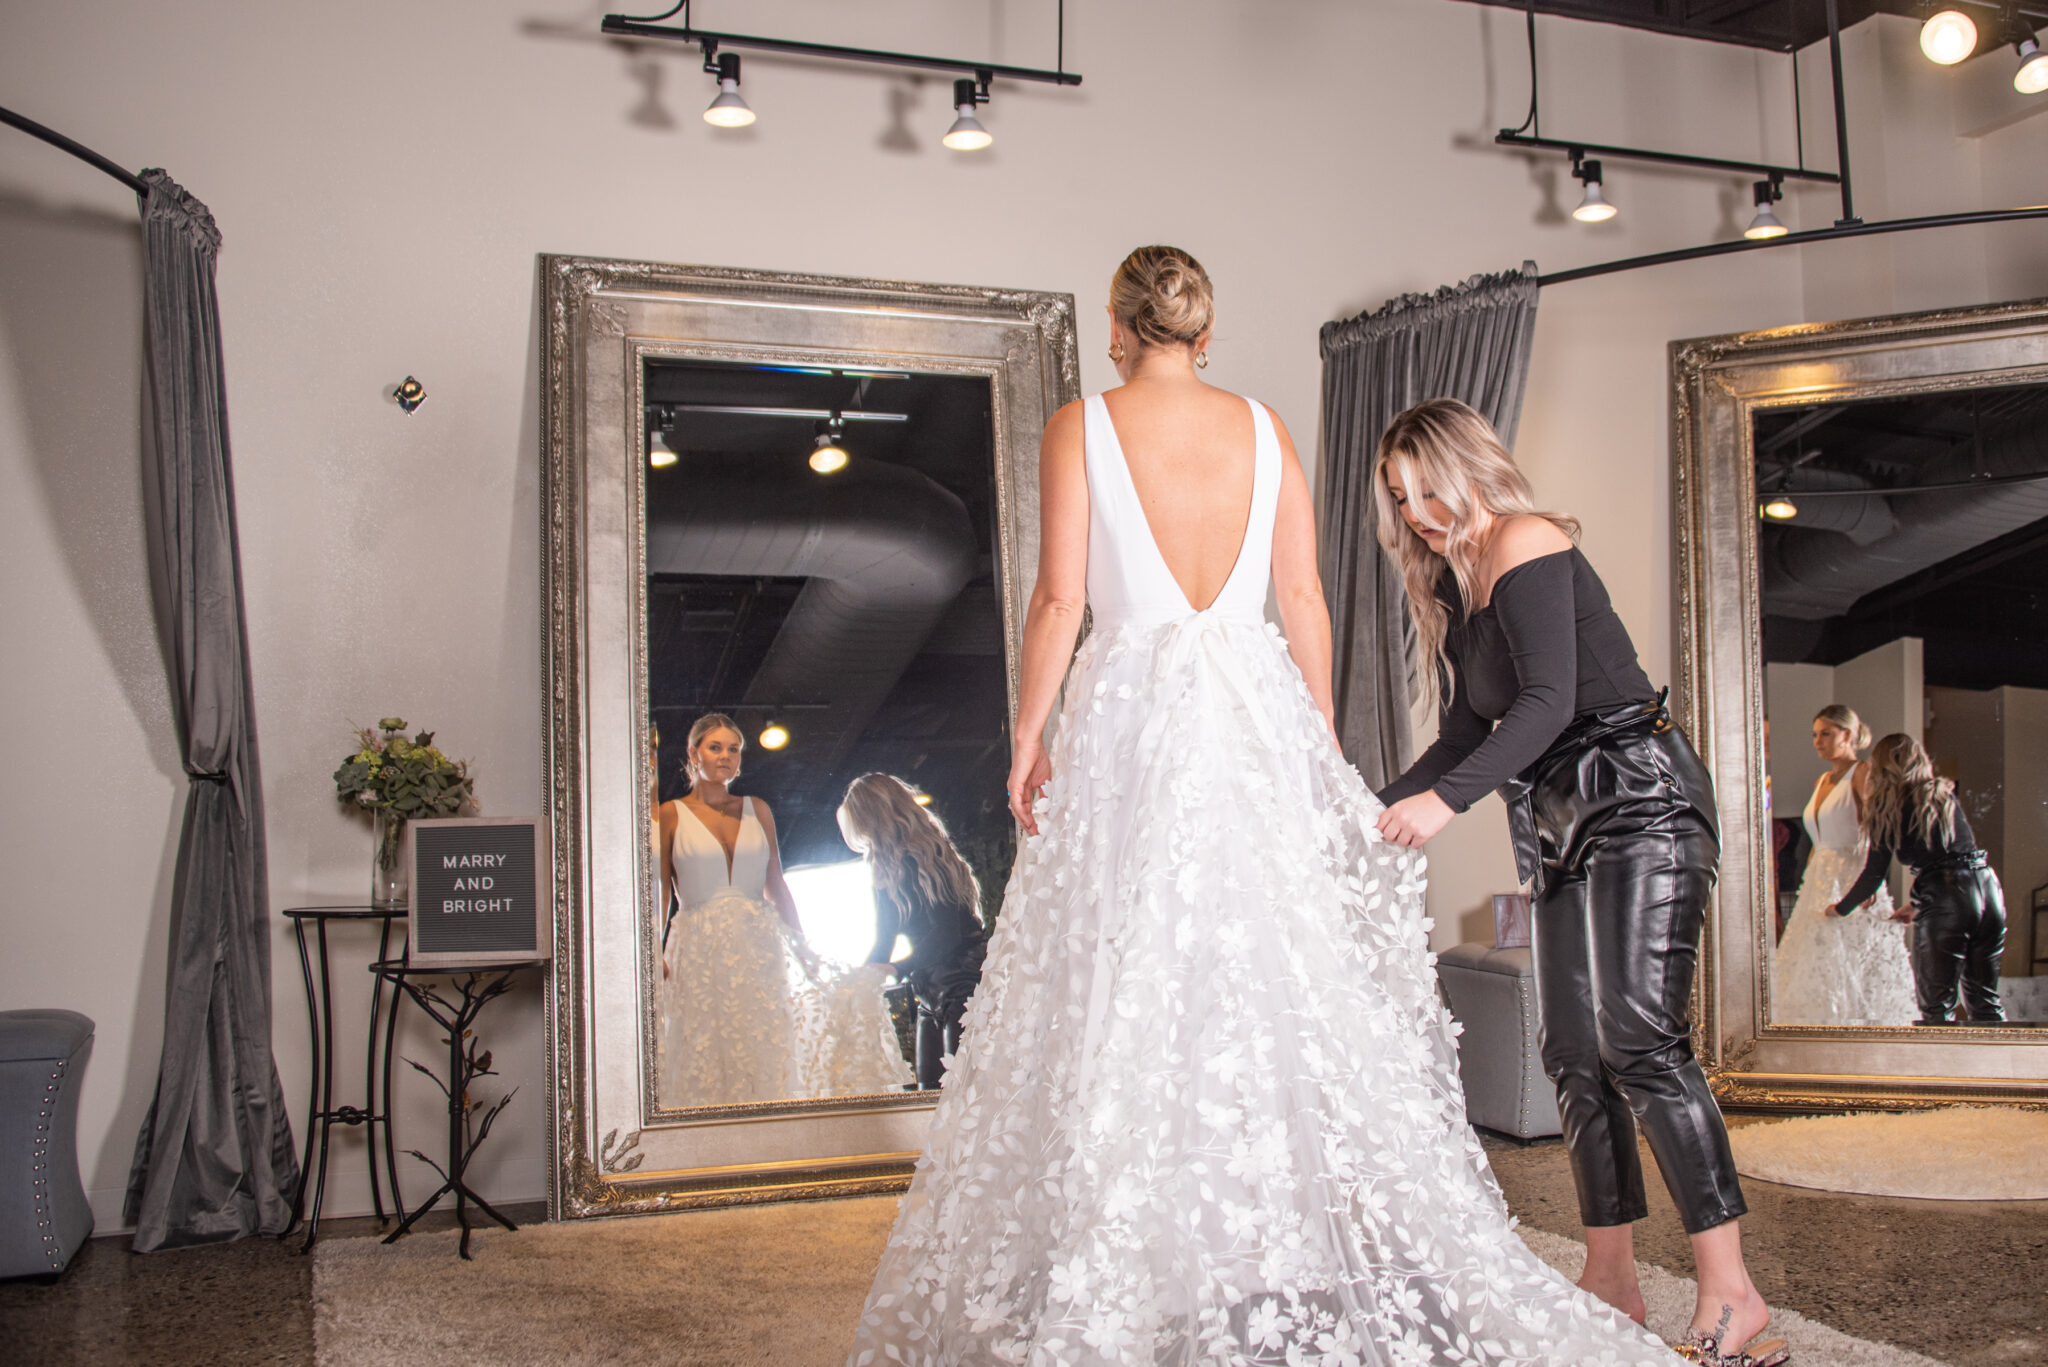 Bride-to-be standing in front of The Wedding Shoppe's mirror admiring her wedding dress while her bridal stylist adjusts the train.